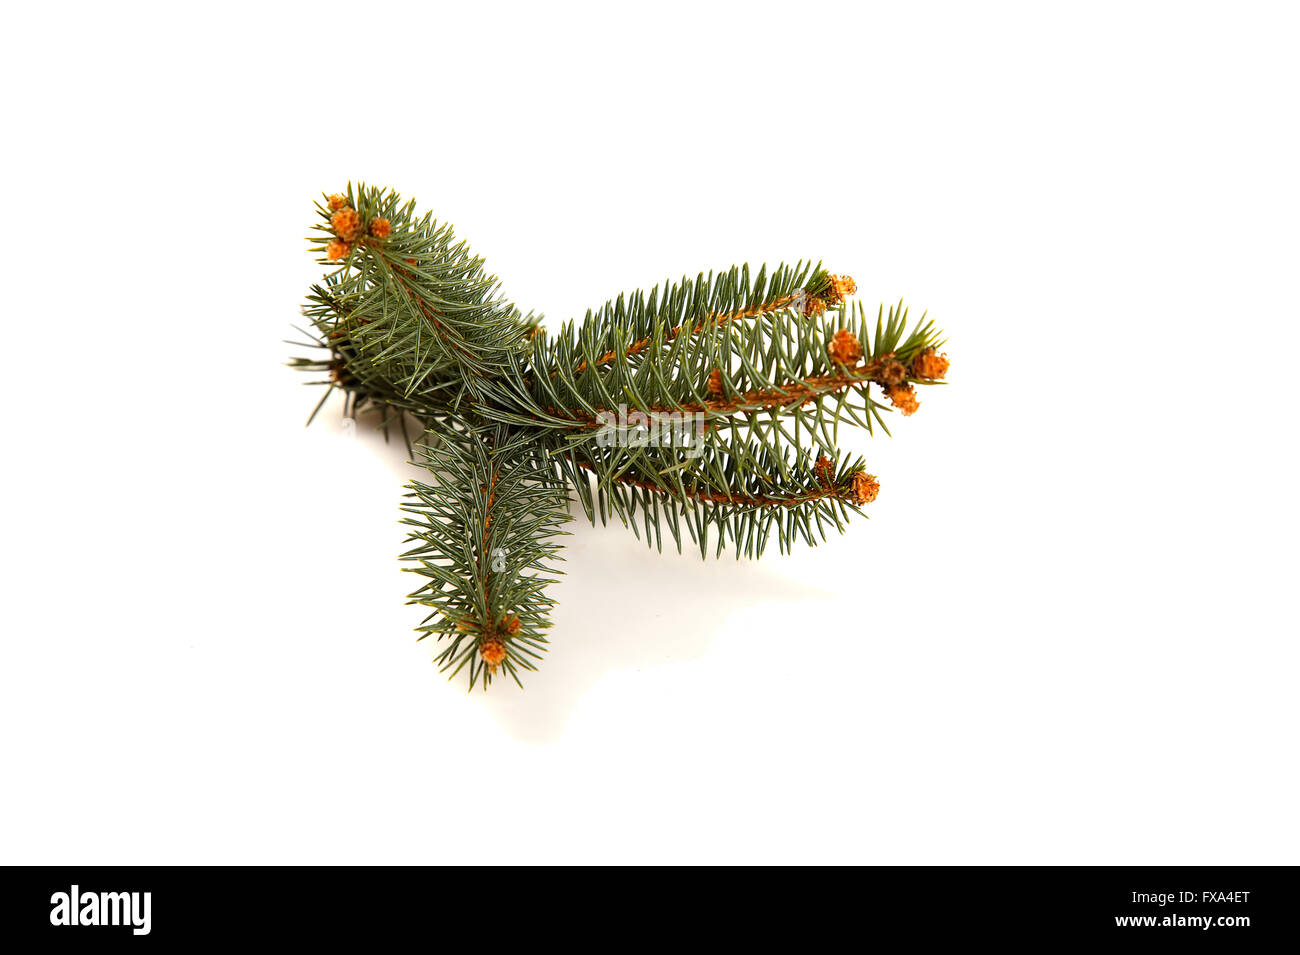 Fir tree branch with orange-brown small cones. Front view. Isolated on white. Soft shadow. Stock Photo